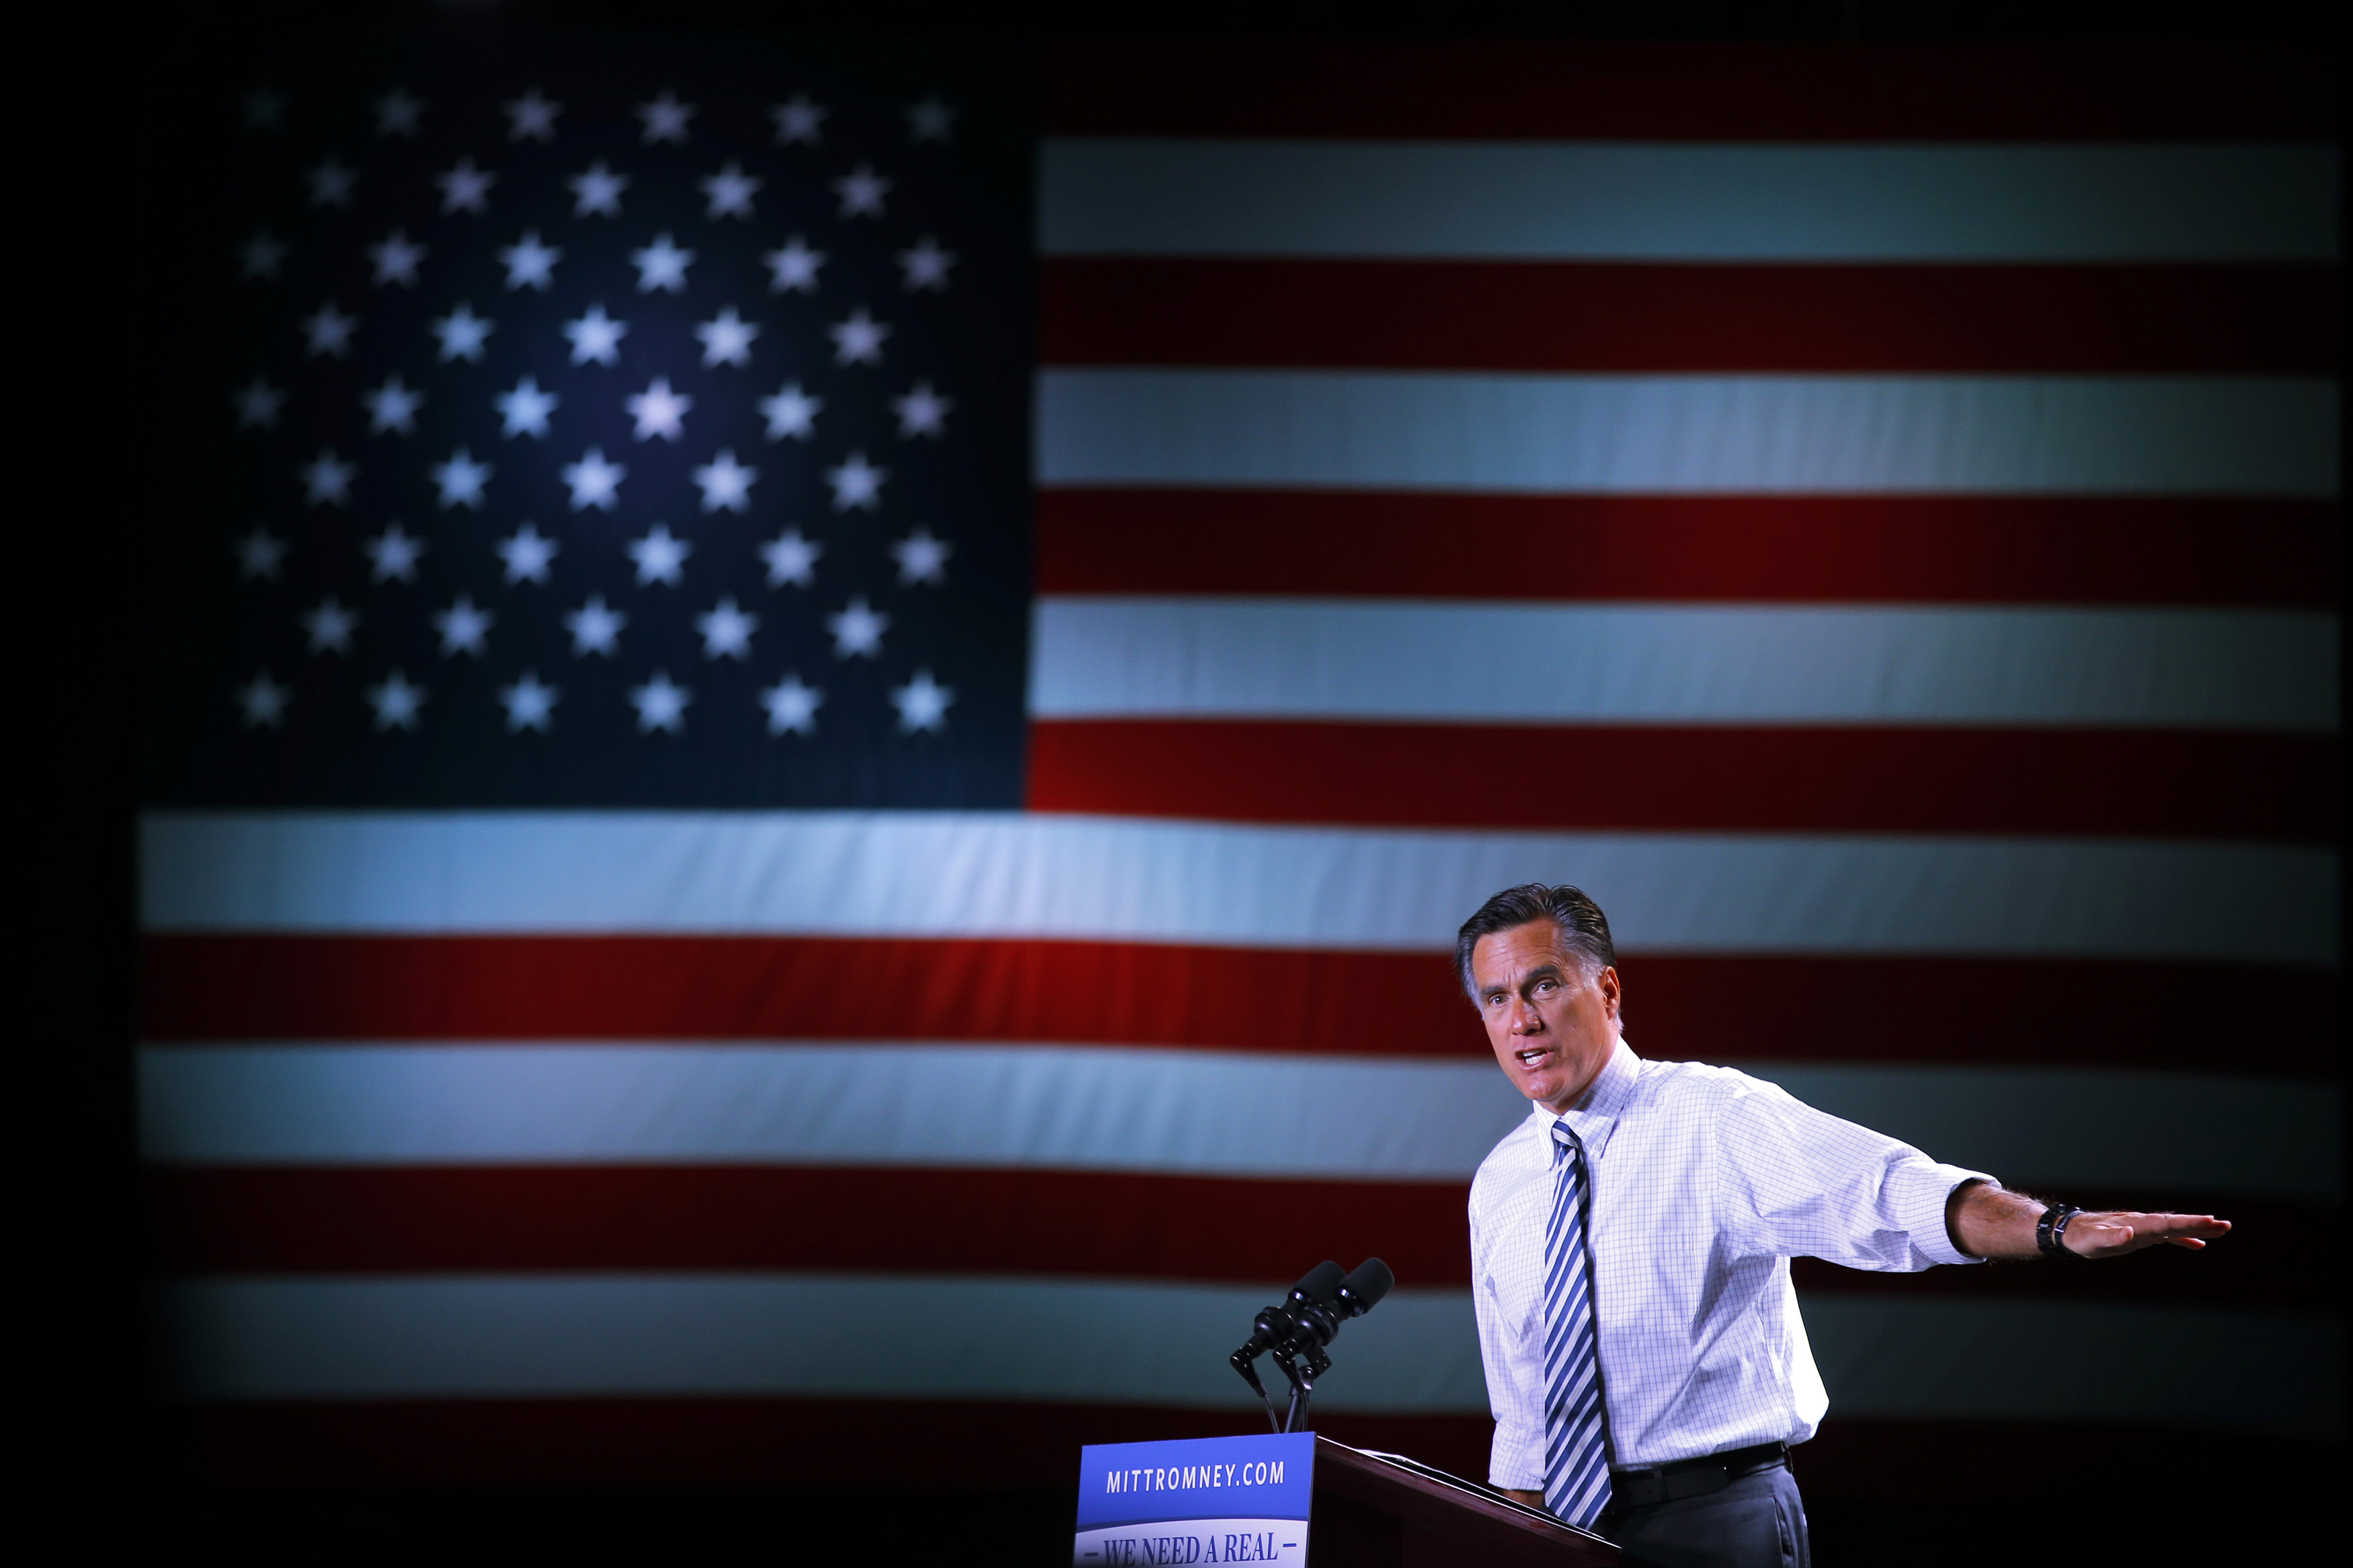 Republican presidential nominee Mitt Romney speaks at a campaign rally in Reno, Nevada October 24, 2012. REUTERS/Brian Snyder